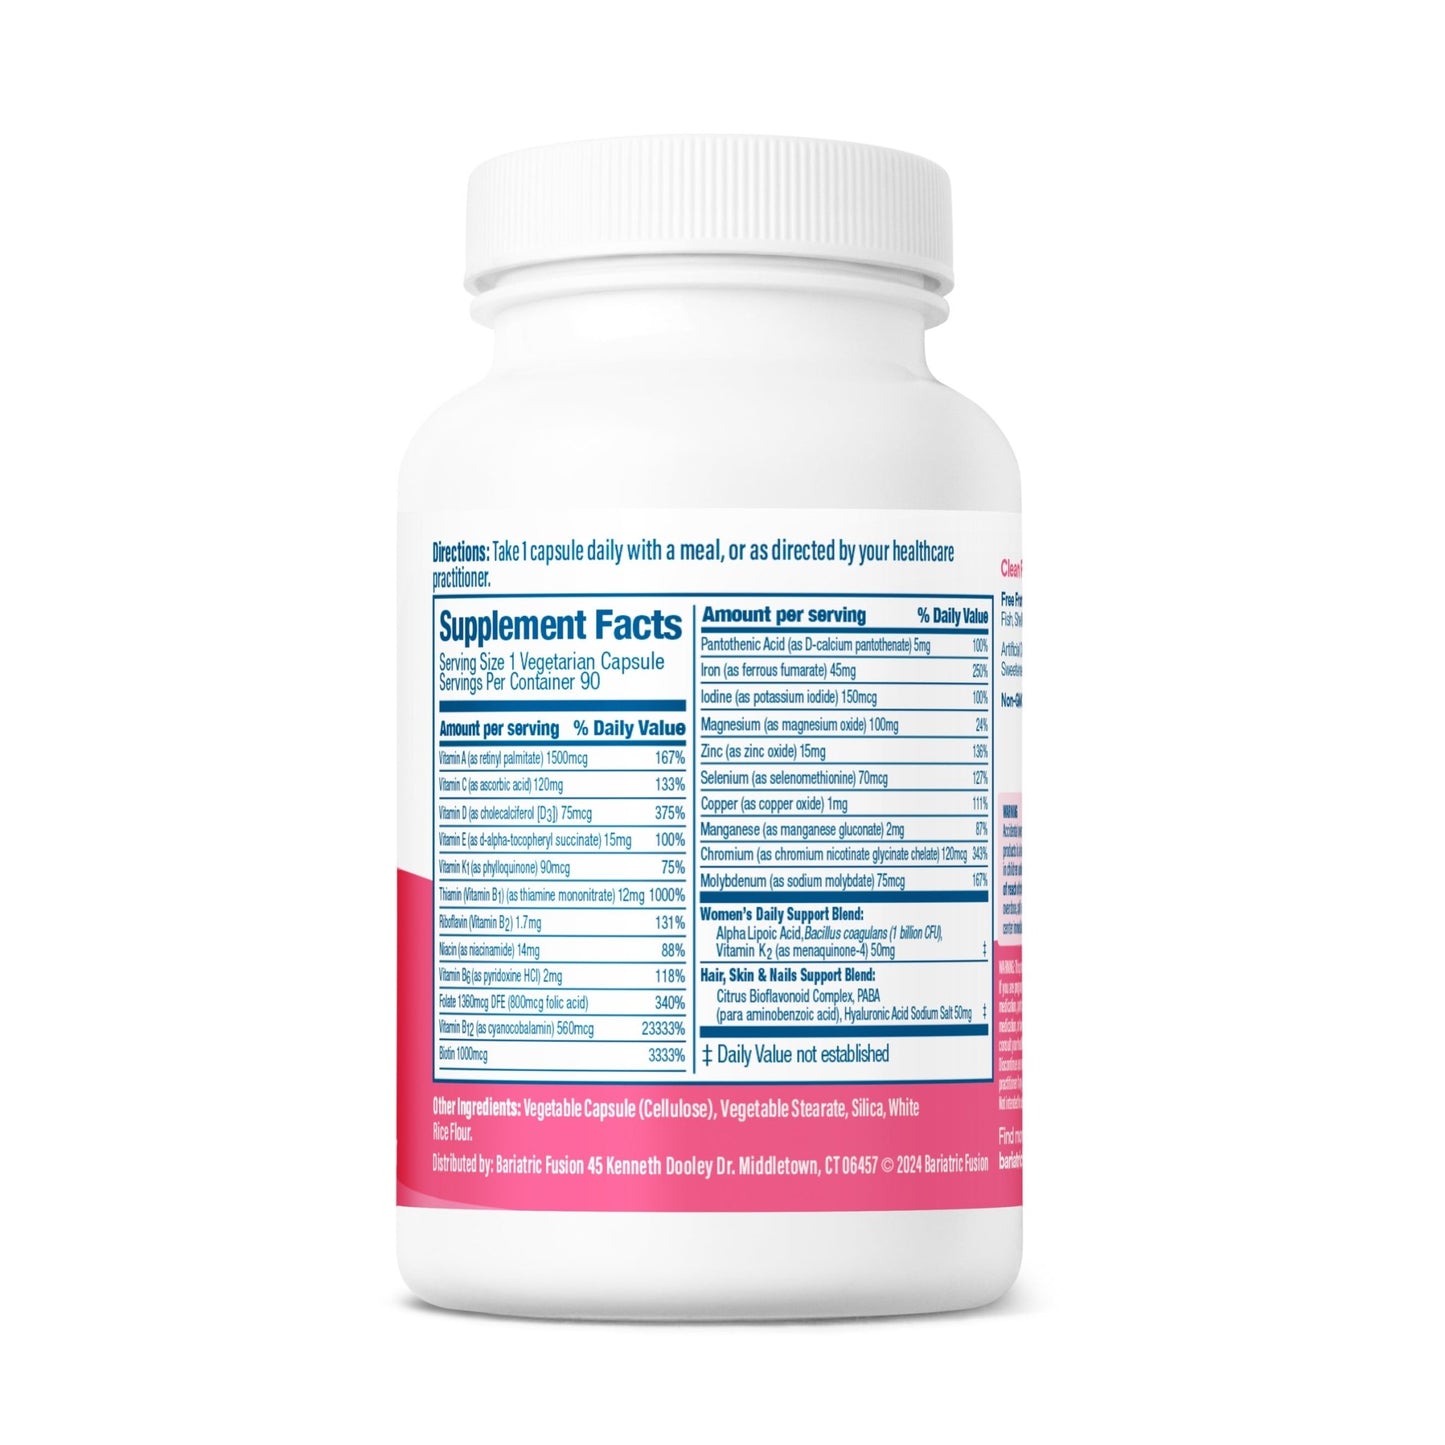 Women’s One Per Day Multivitamin With Iron 90 capsules ingredients and directions.